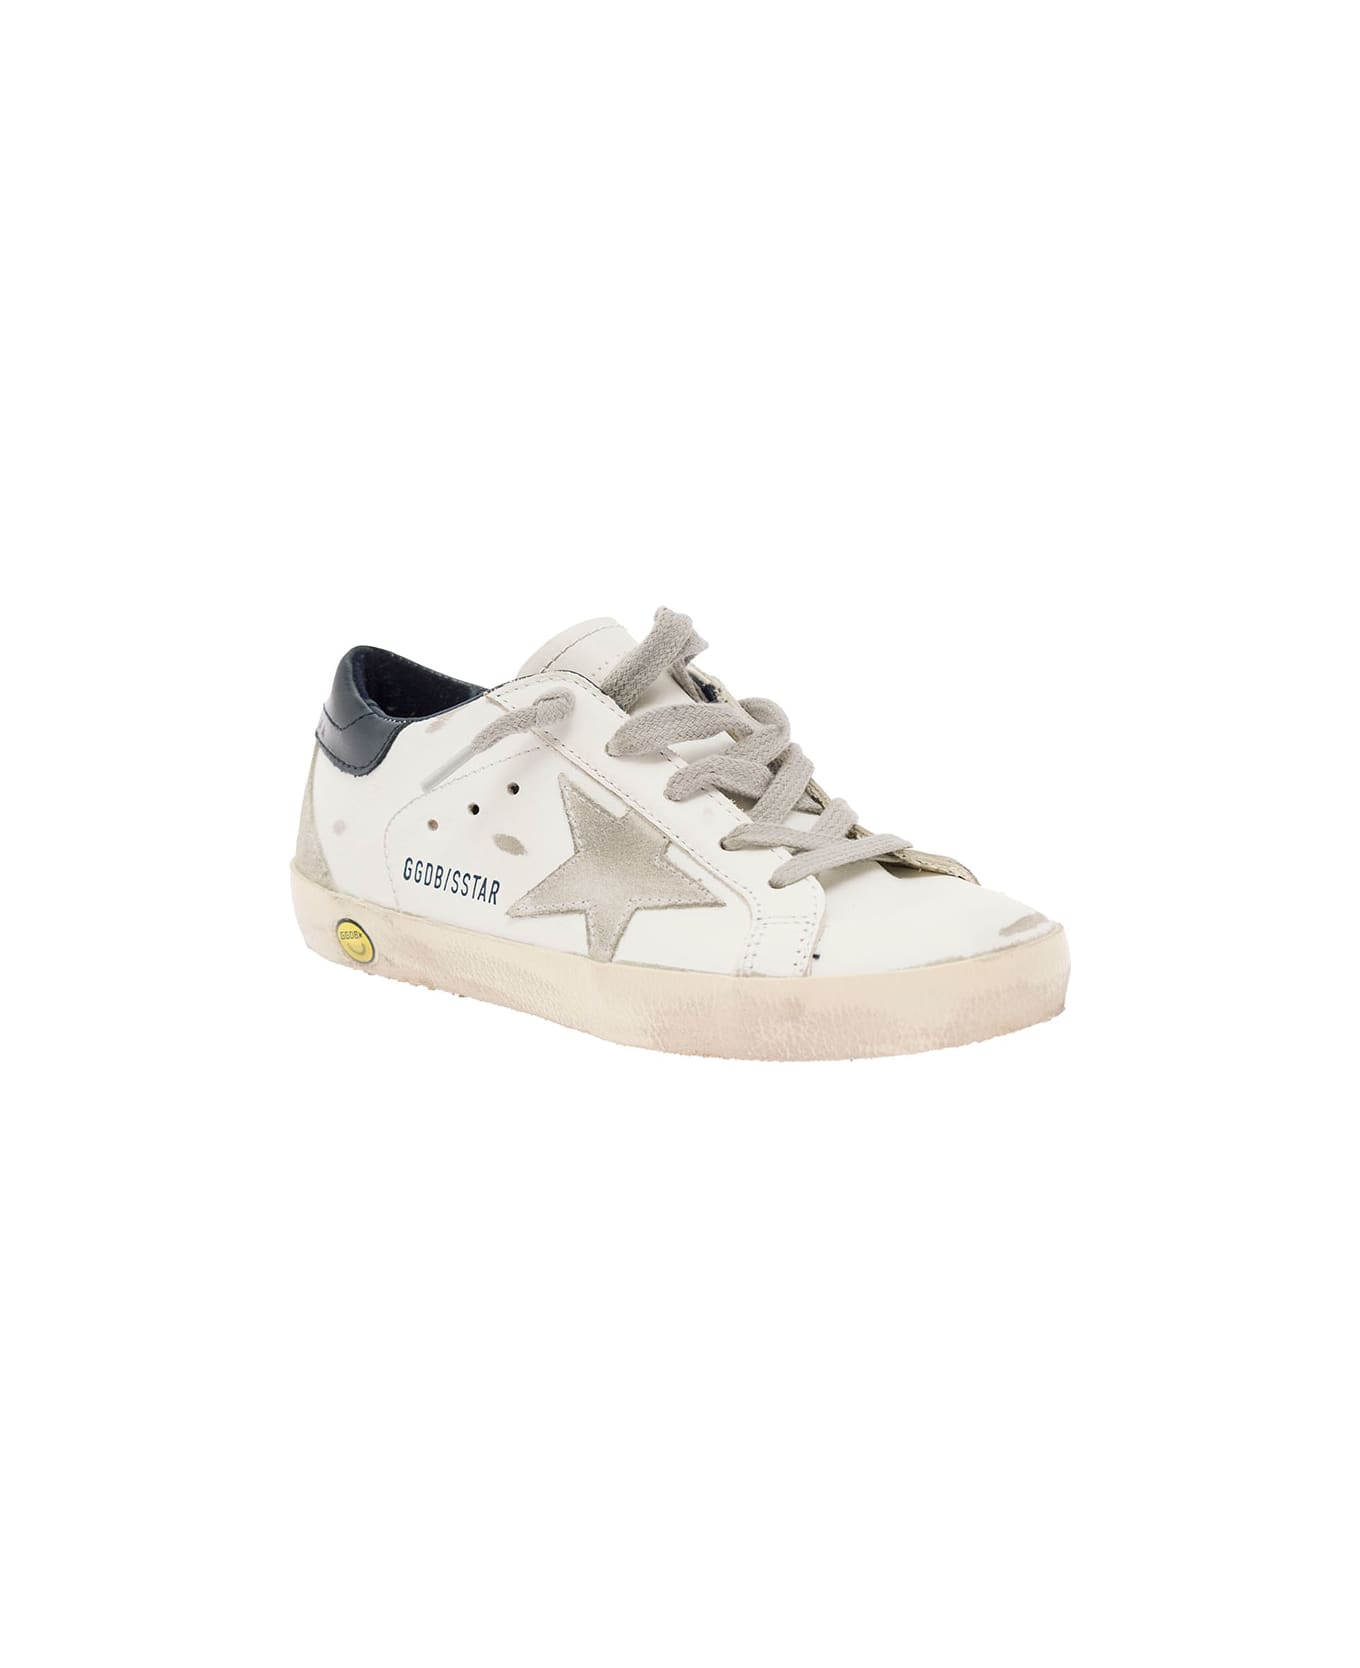 Golden Goose Kids Boy's White Leather And Suede Super Star Sneakers - White